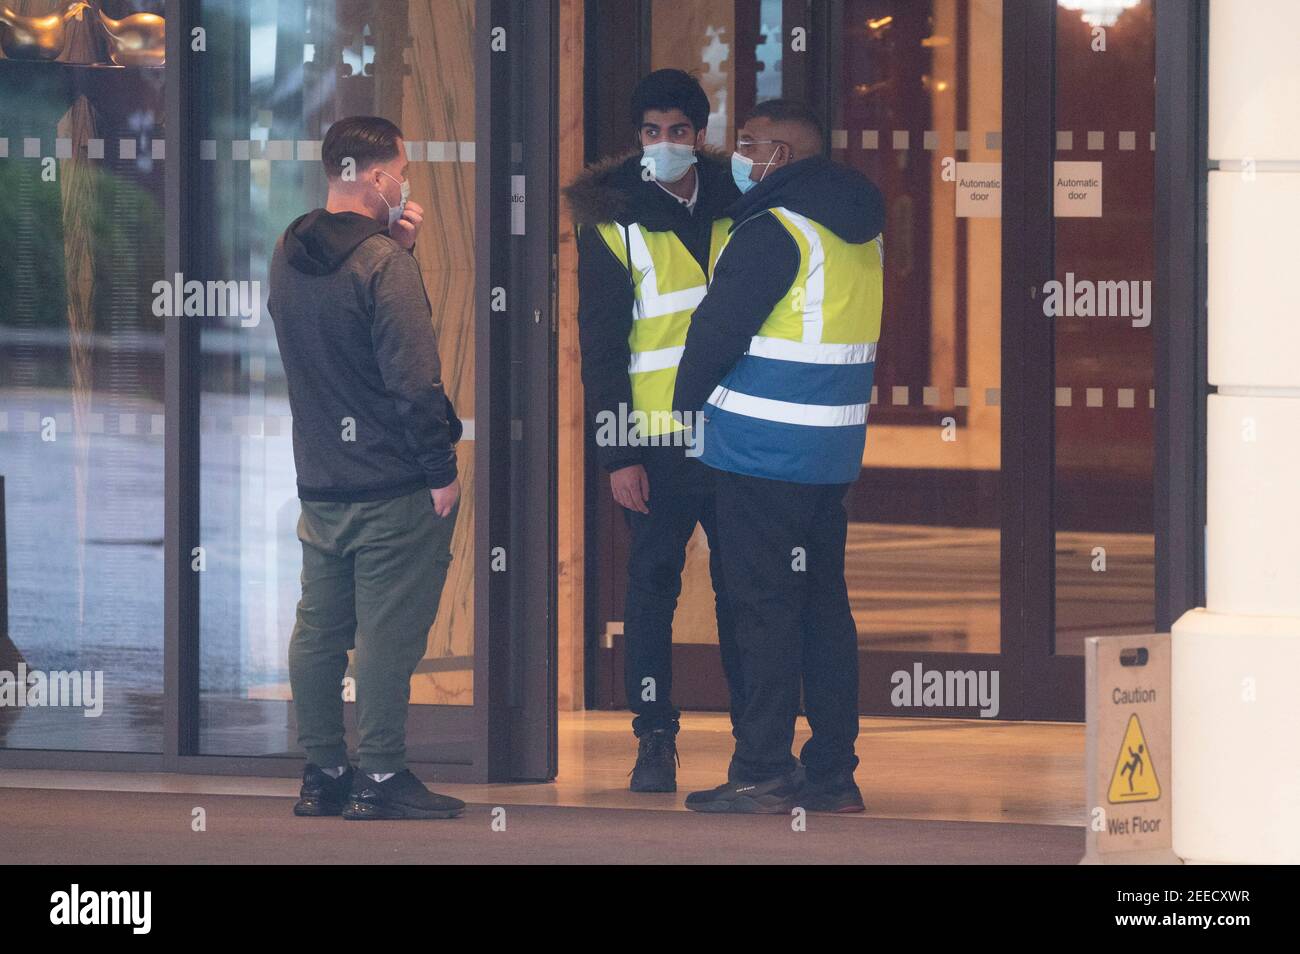 London, Britain. 15th Feb, 2021. Security staff guard the entrance of the Radisson Blu Edwardian Hotel in London, Britain, on Feb. 15, 2021. From Monday, all British and Irish citizens and British residents who arrive in England after being in the 'red list' of more than 30 high-risk countries now have to self-isolate in hotels. The 'red list' countries include South Africa, Portugal and South American nations. Credit: Ray Tang/Xinhua/Alamy Live News Stock Photo